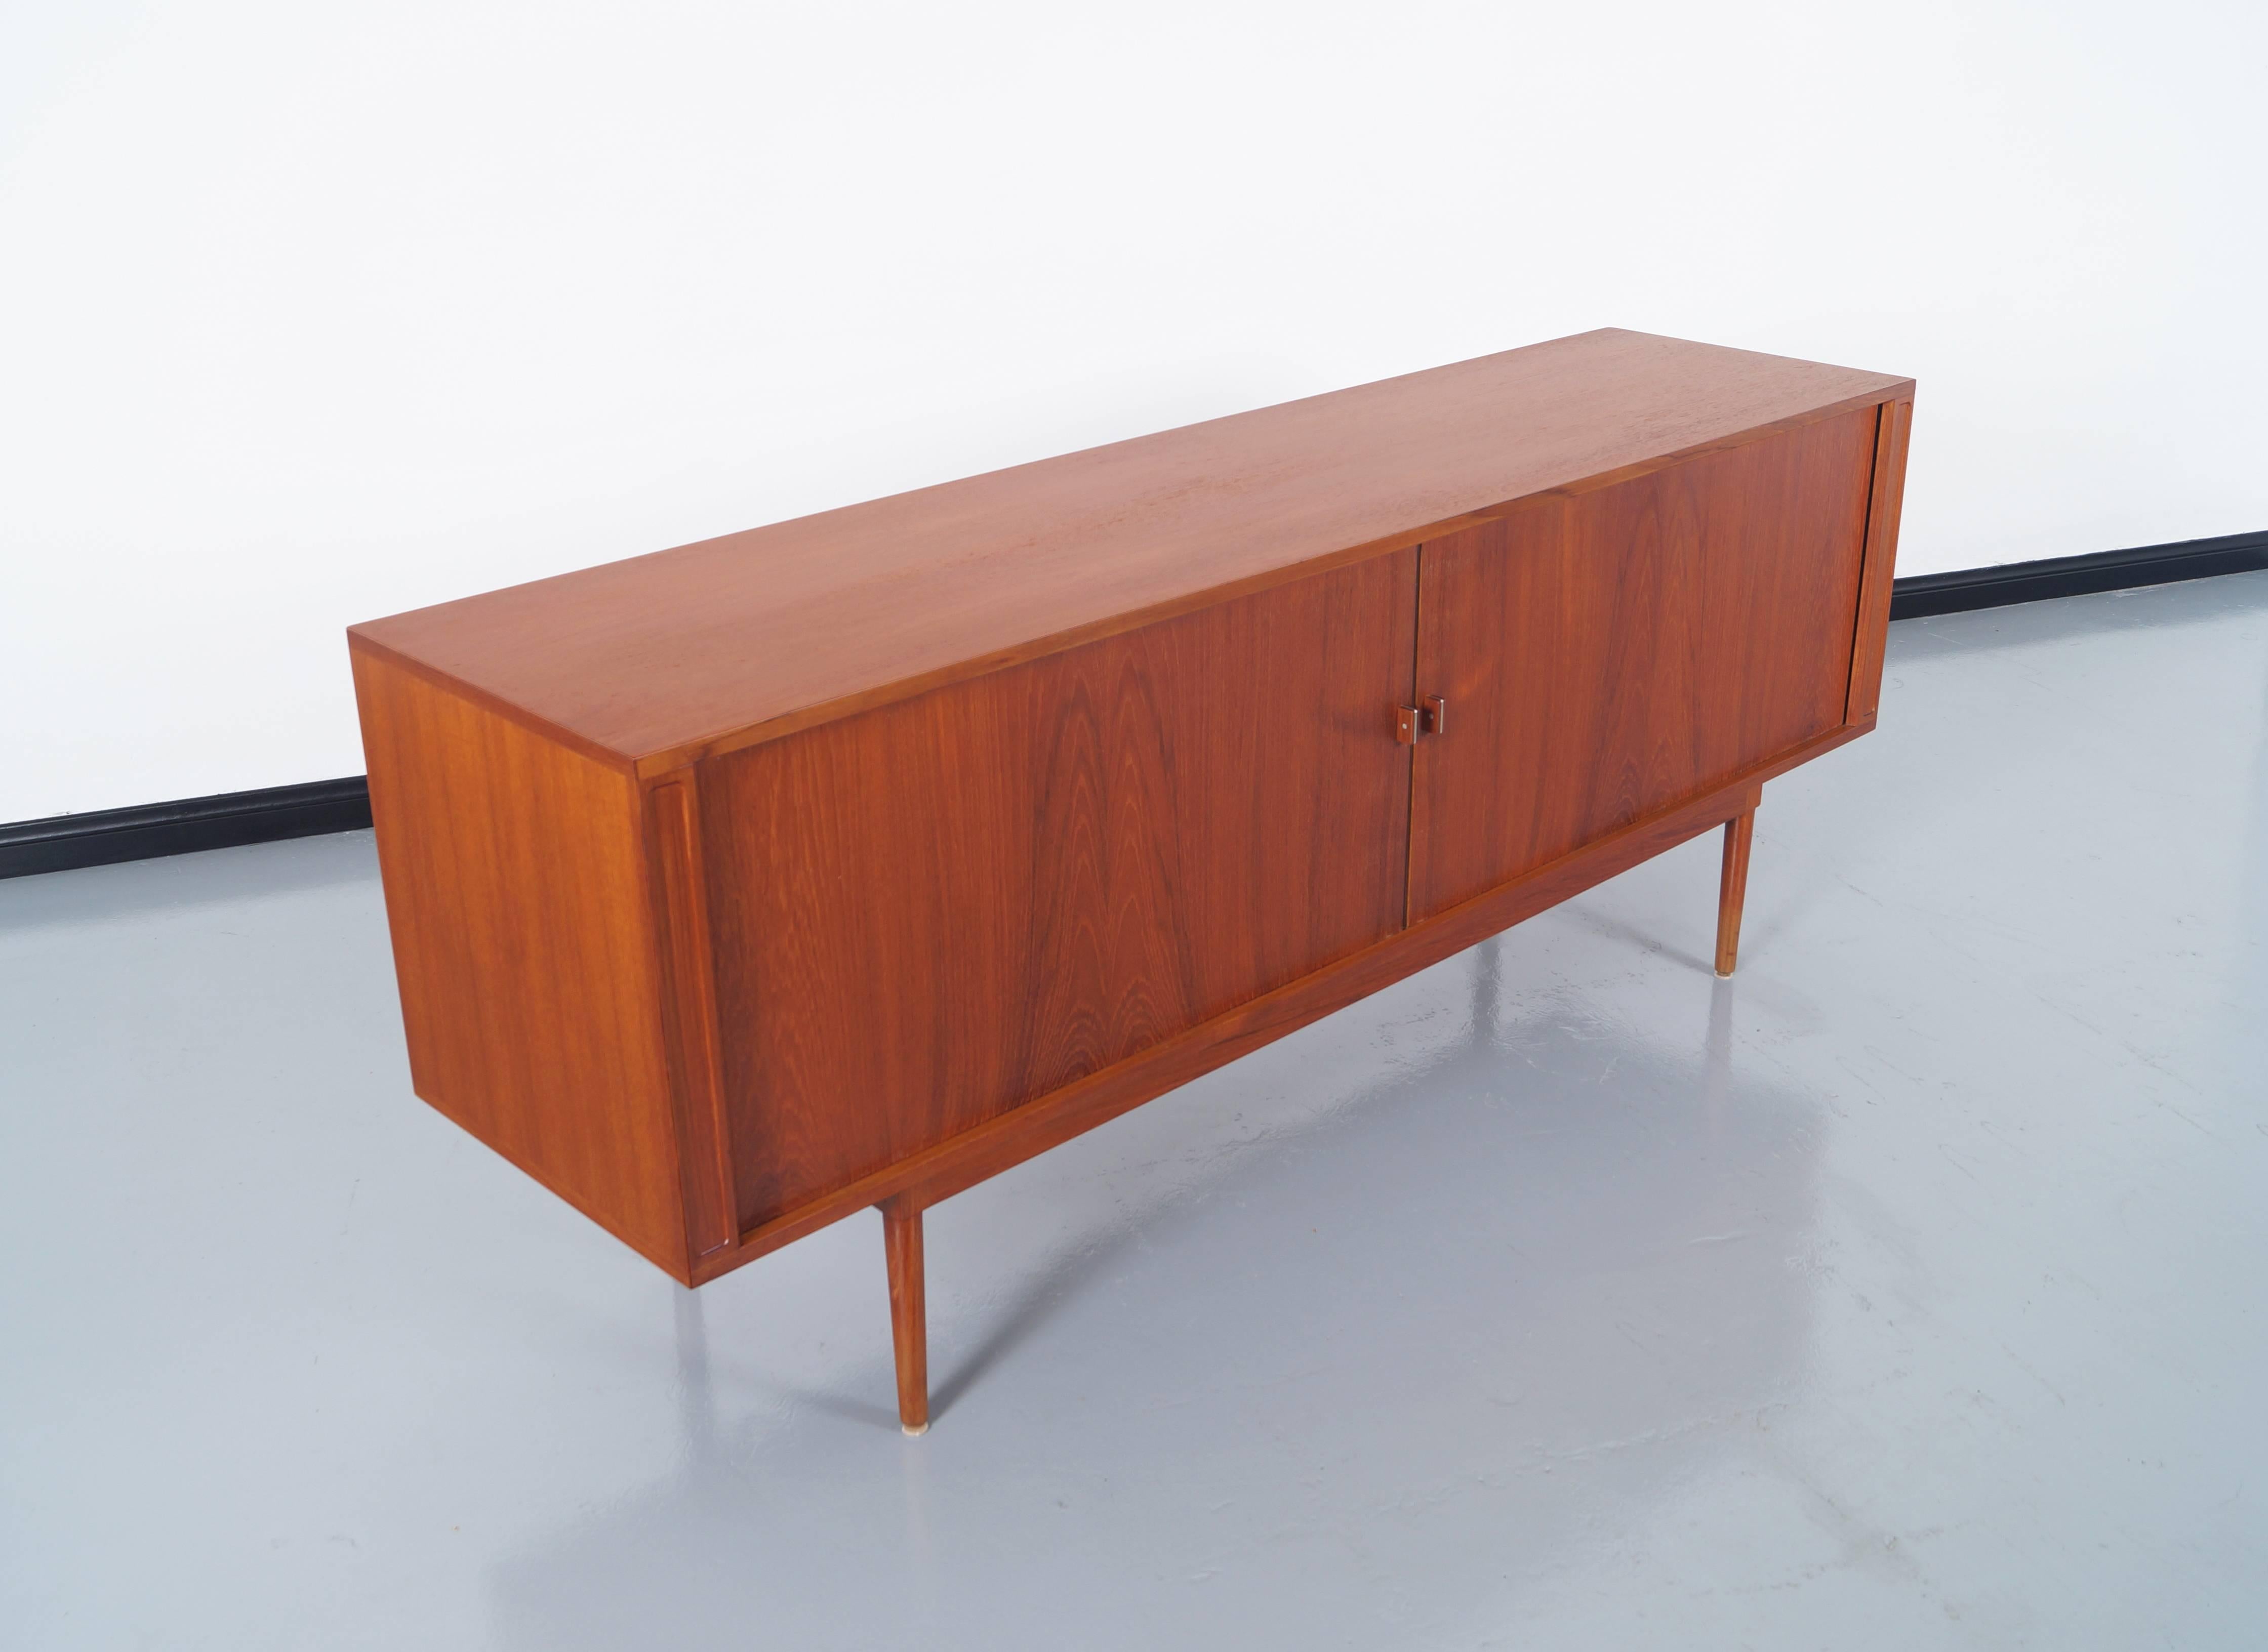 This amazing credenza was designed by Jens H. Quistgaard and manufactured by Lovig Design. Features two tambour door that open to three sections. The middle sections has five adjustable drawers. The section on each end has adjustable shelves.